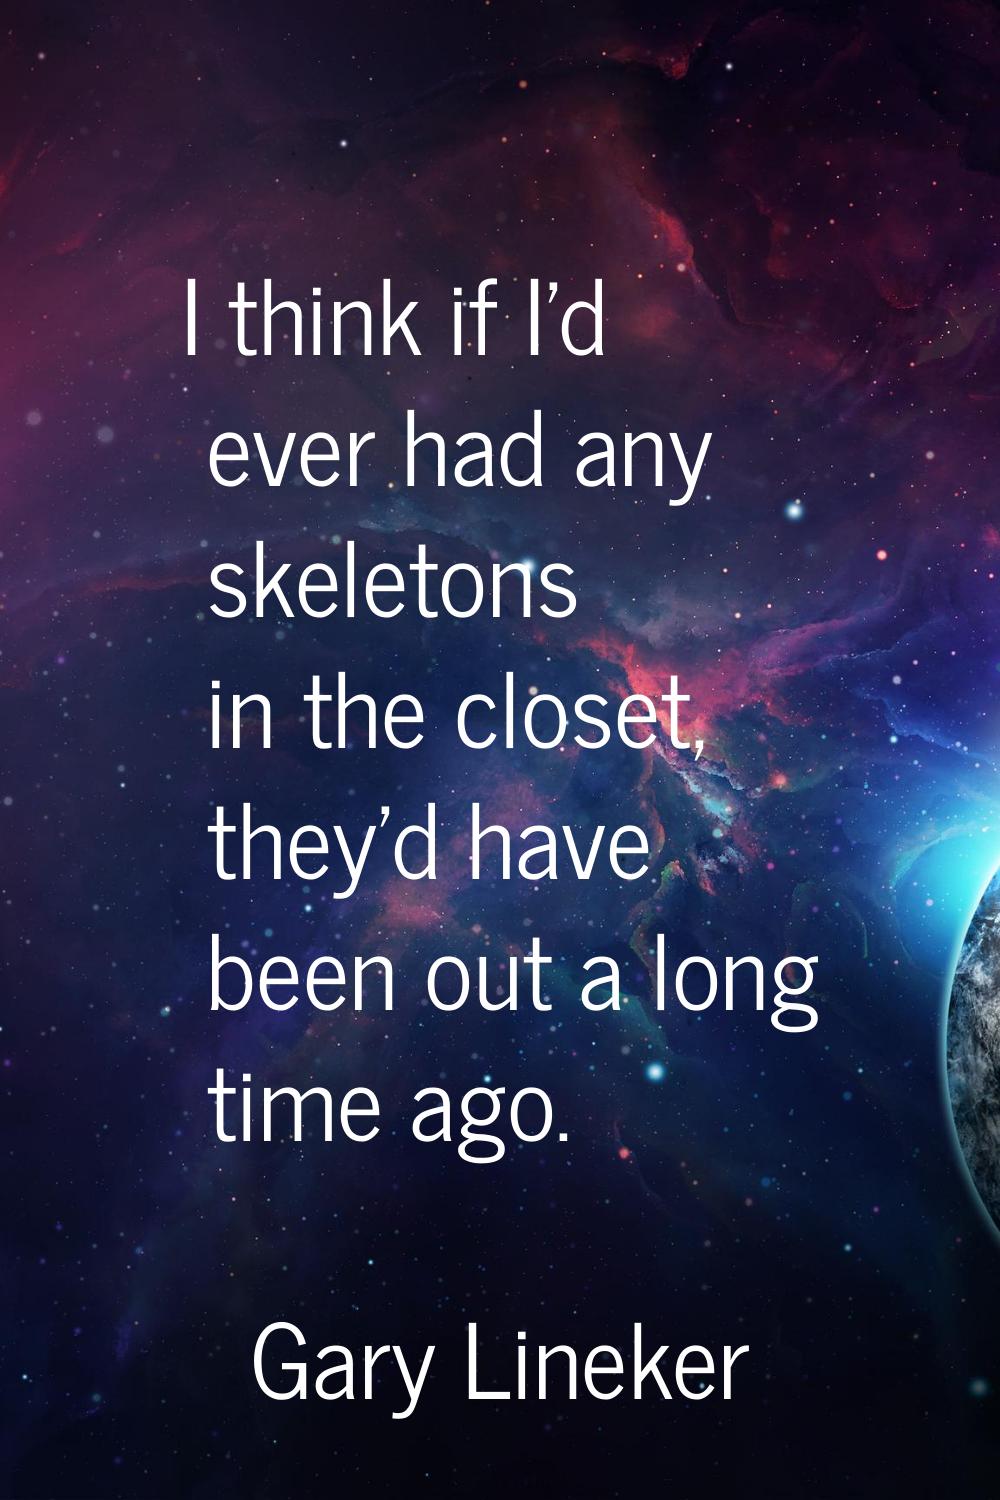 I think if I'd ever had any skeletons in the closet, they'd have been out a long time ago.